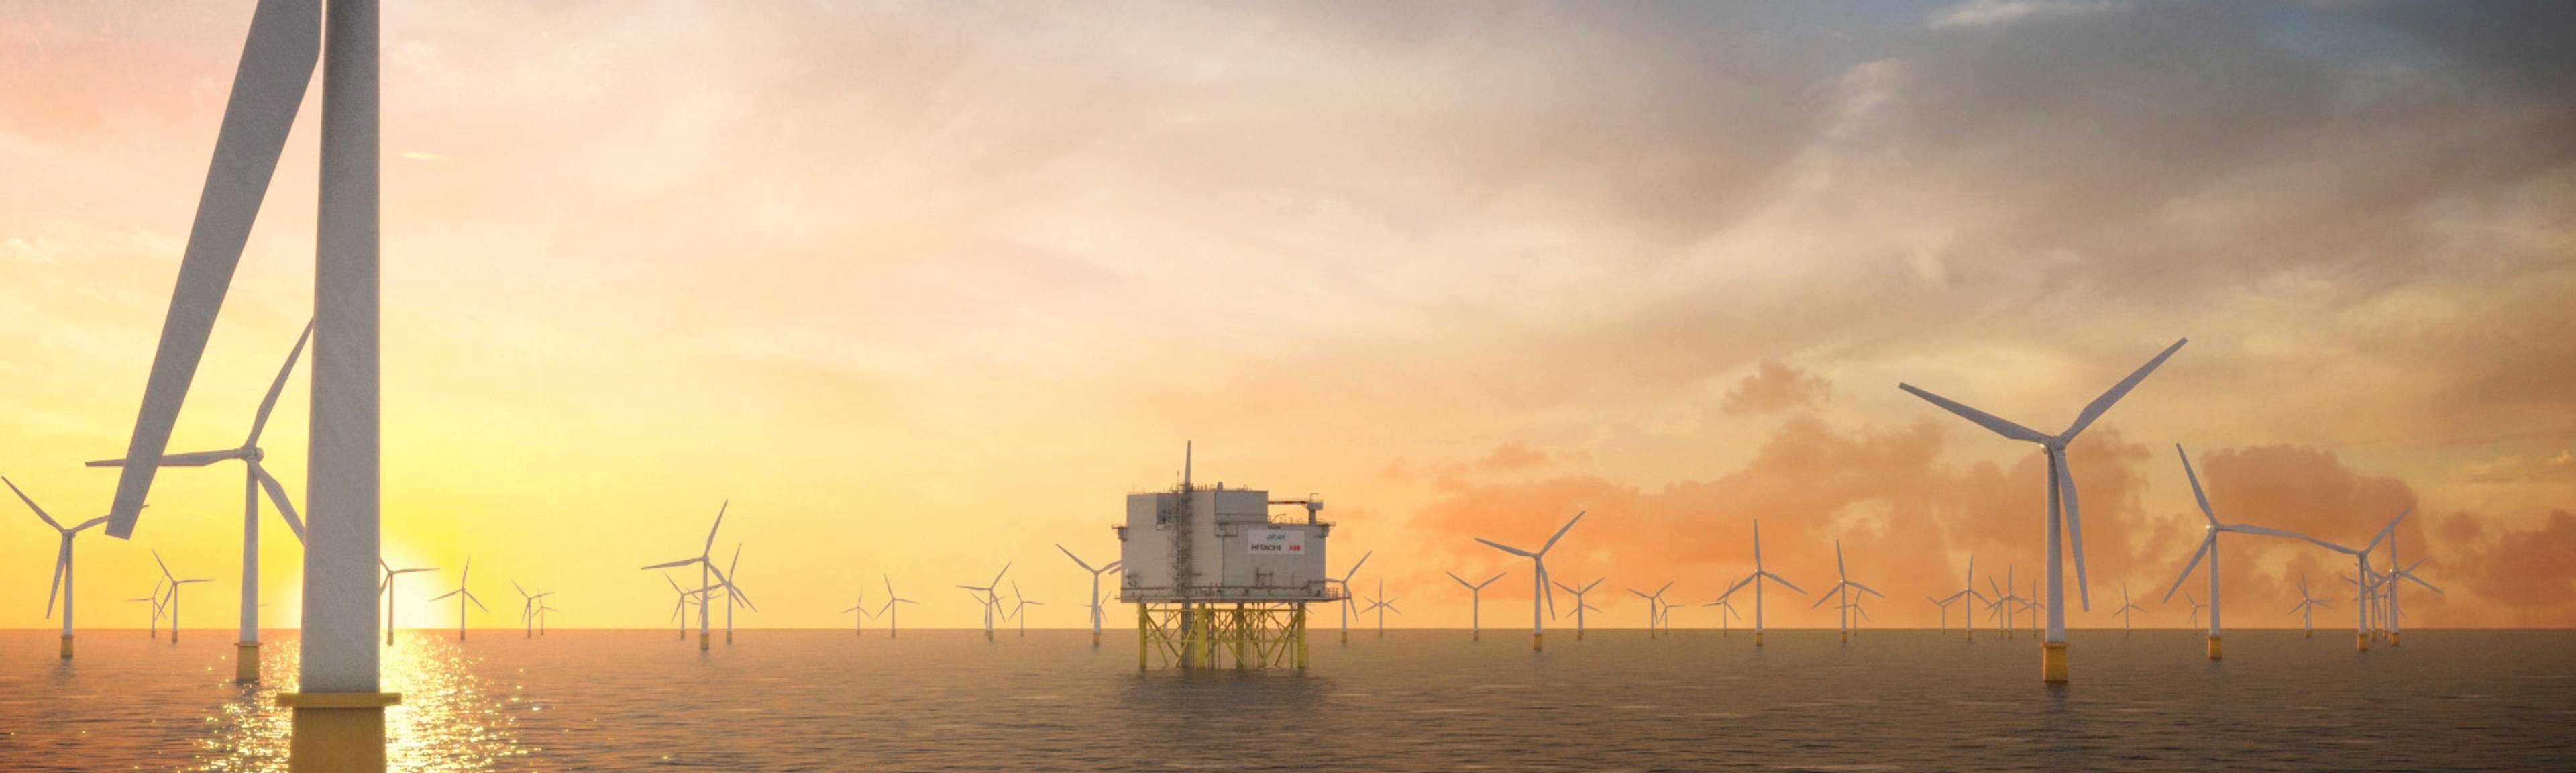 Artist's impression of Dogger Bank offshore wind farm